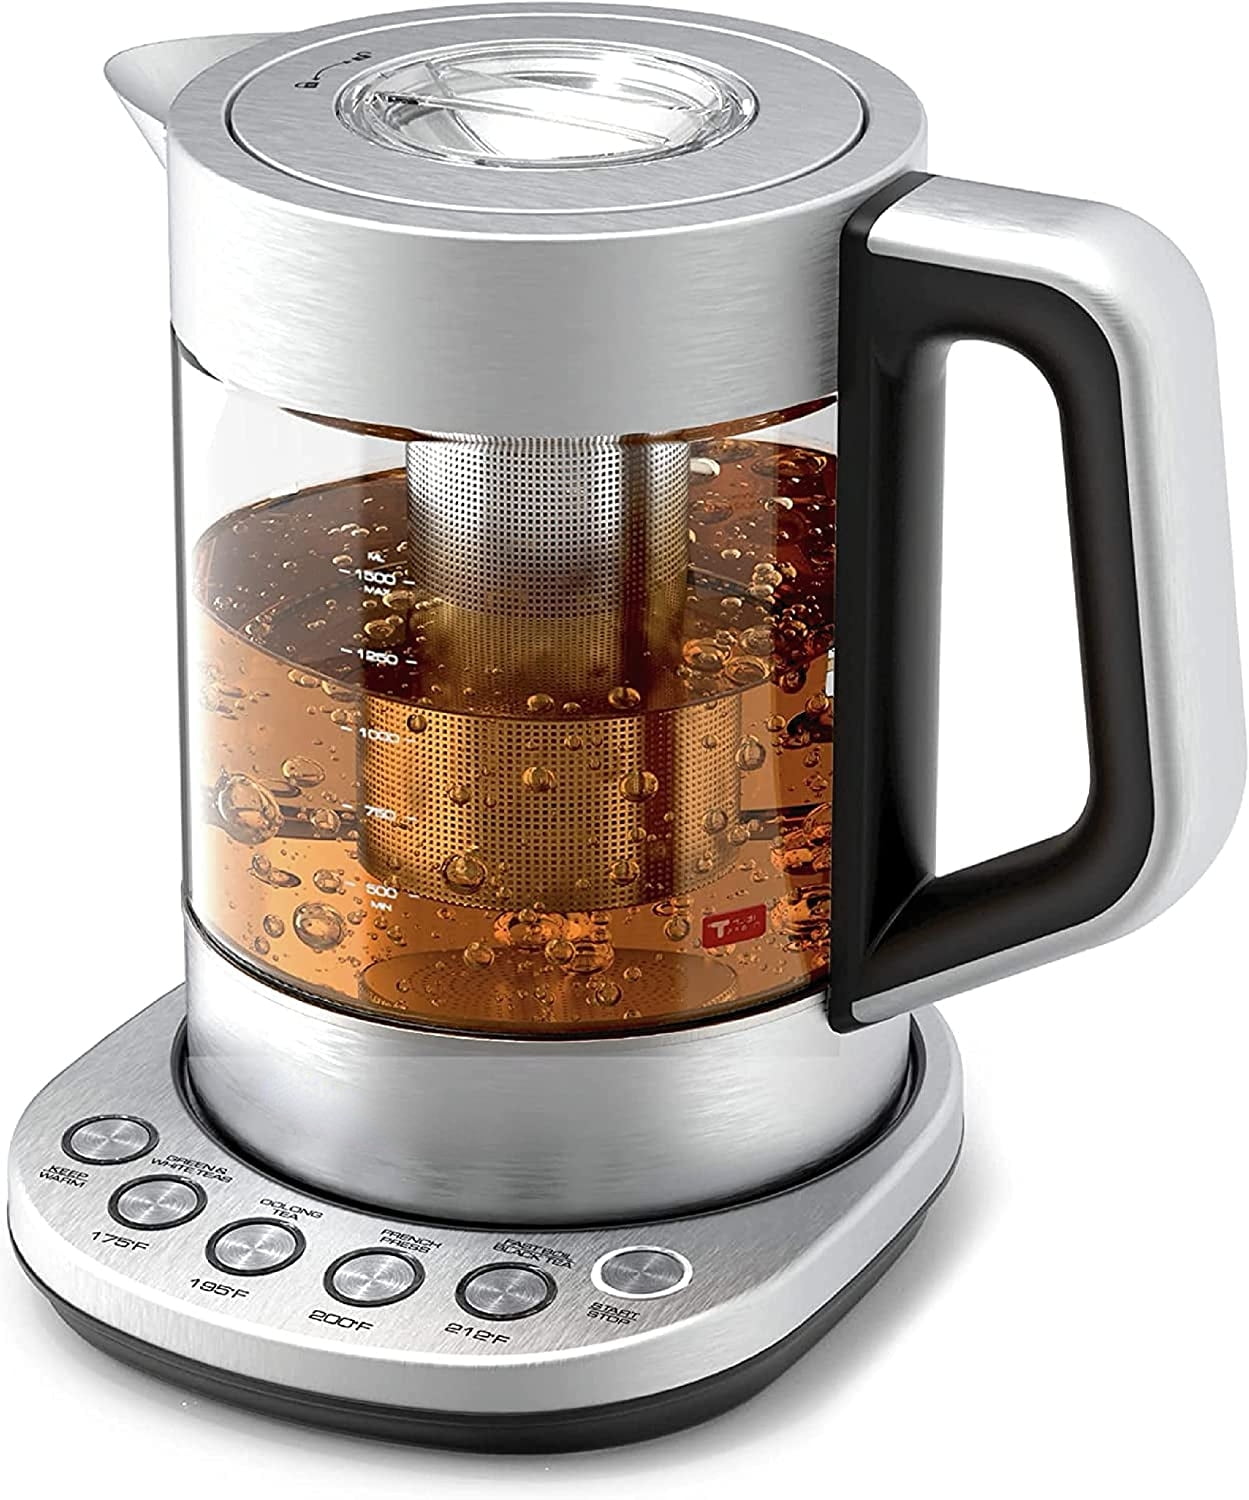  ICOOKPOT Hot Tea Maker Glass Electric Kettle with Tea